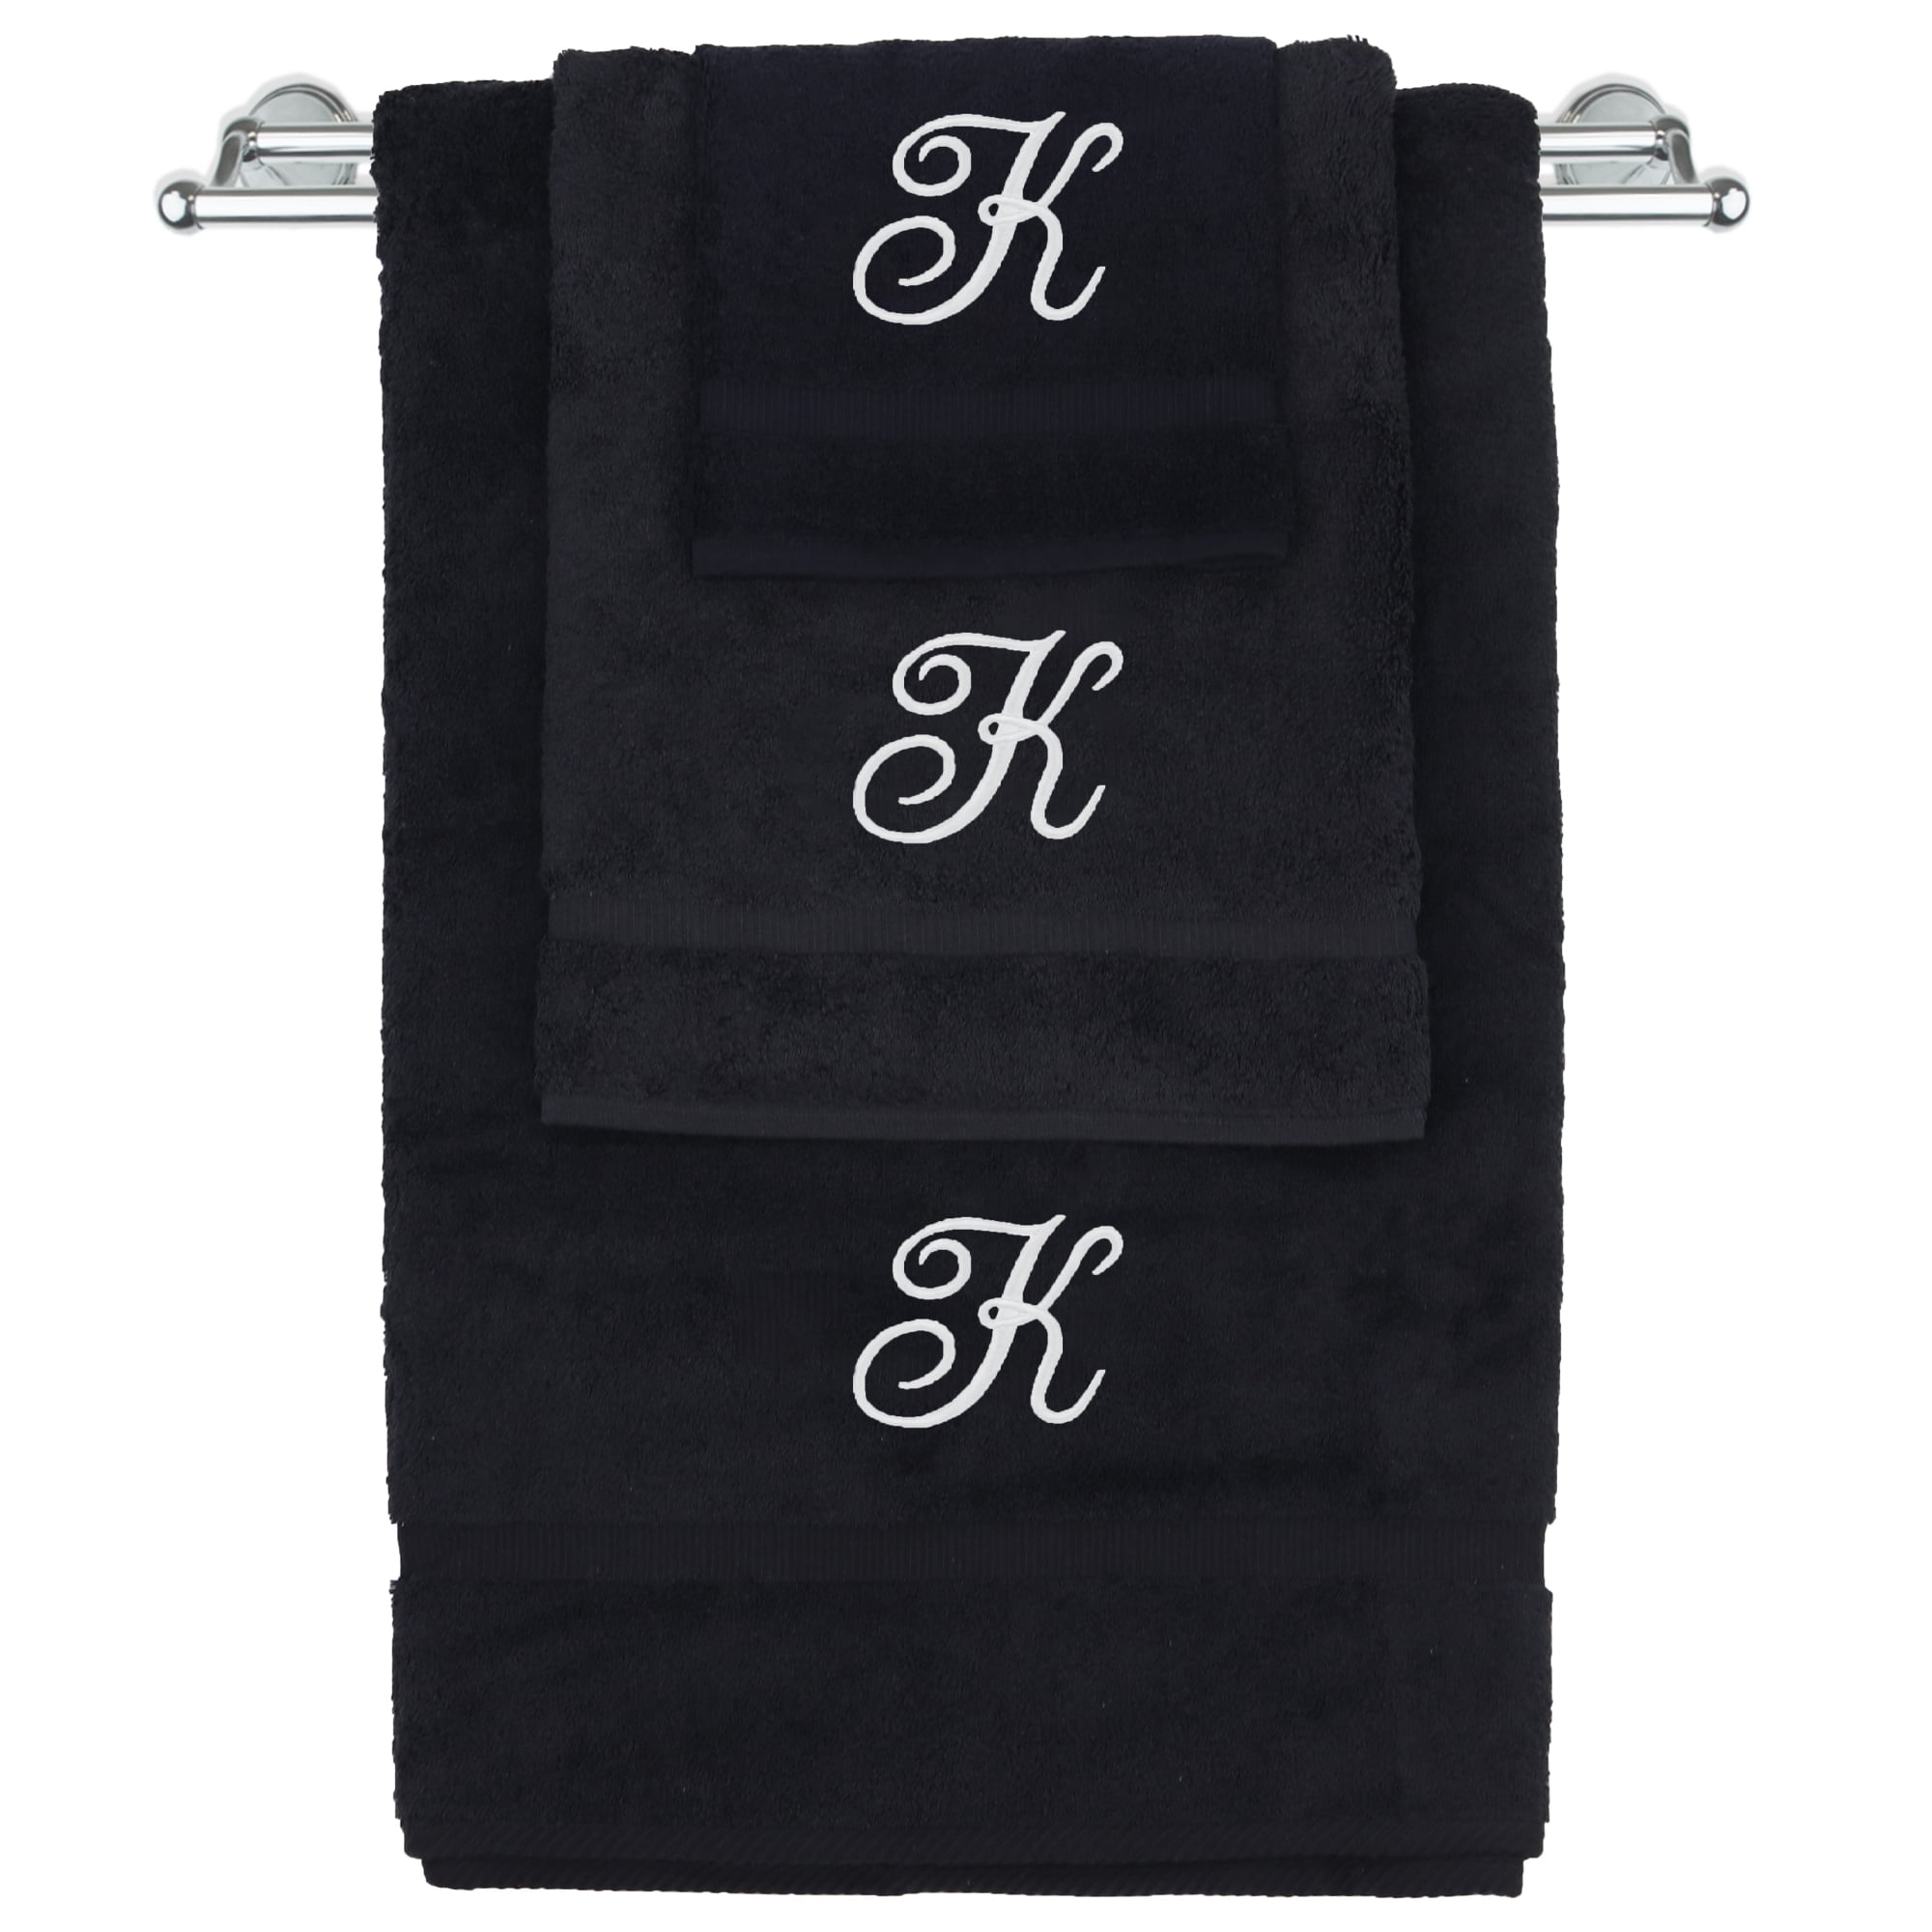 Soft Letter Embroidery Hand Towels Kitchen Bathroom Hand Towel with Hanging Loops Quick Dry Soft Absorbent Microfiber Towels B, Size: 50, Black